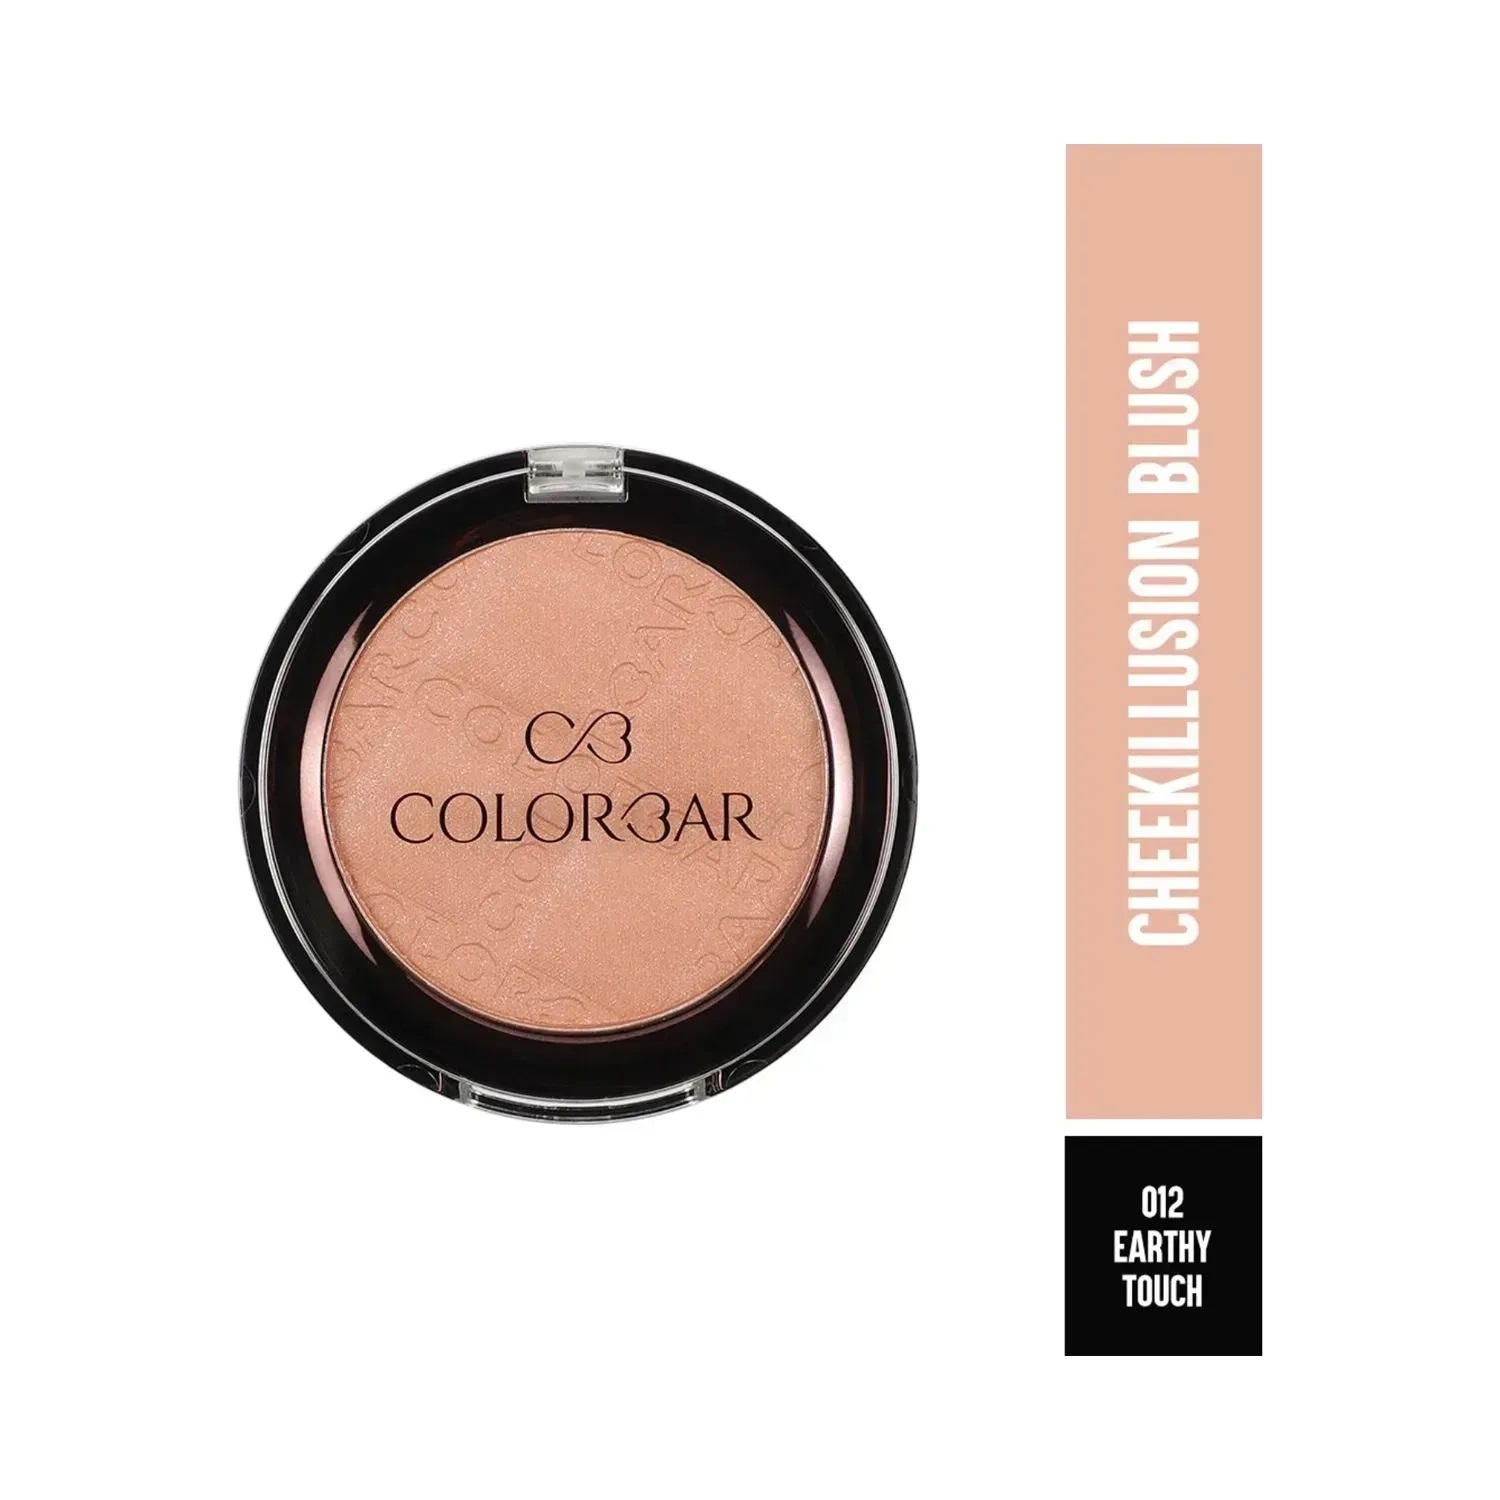 Colorbar | Colorbar Cheek Illusion Blush Compact - 012 Earthy Touch (4g)